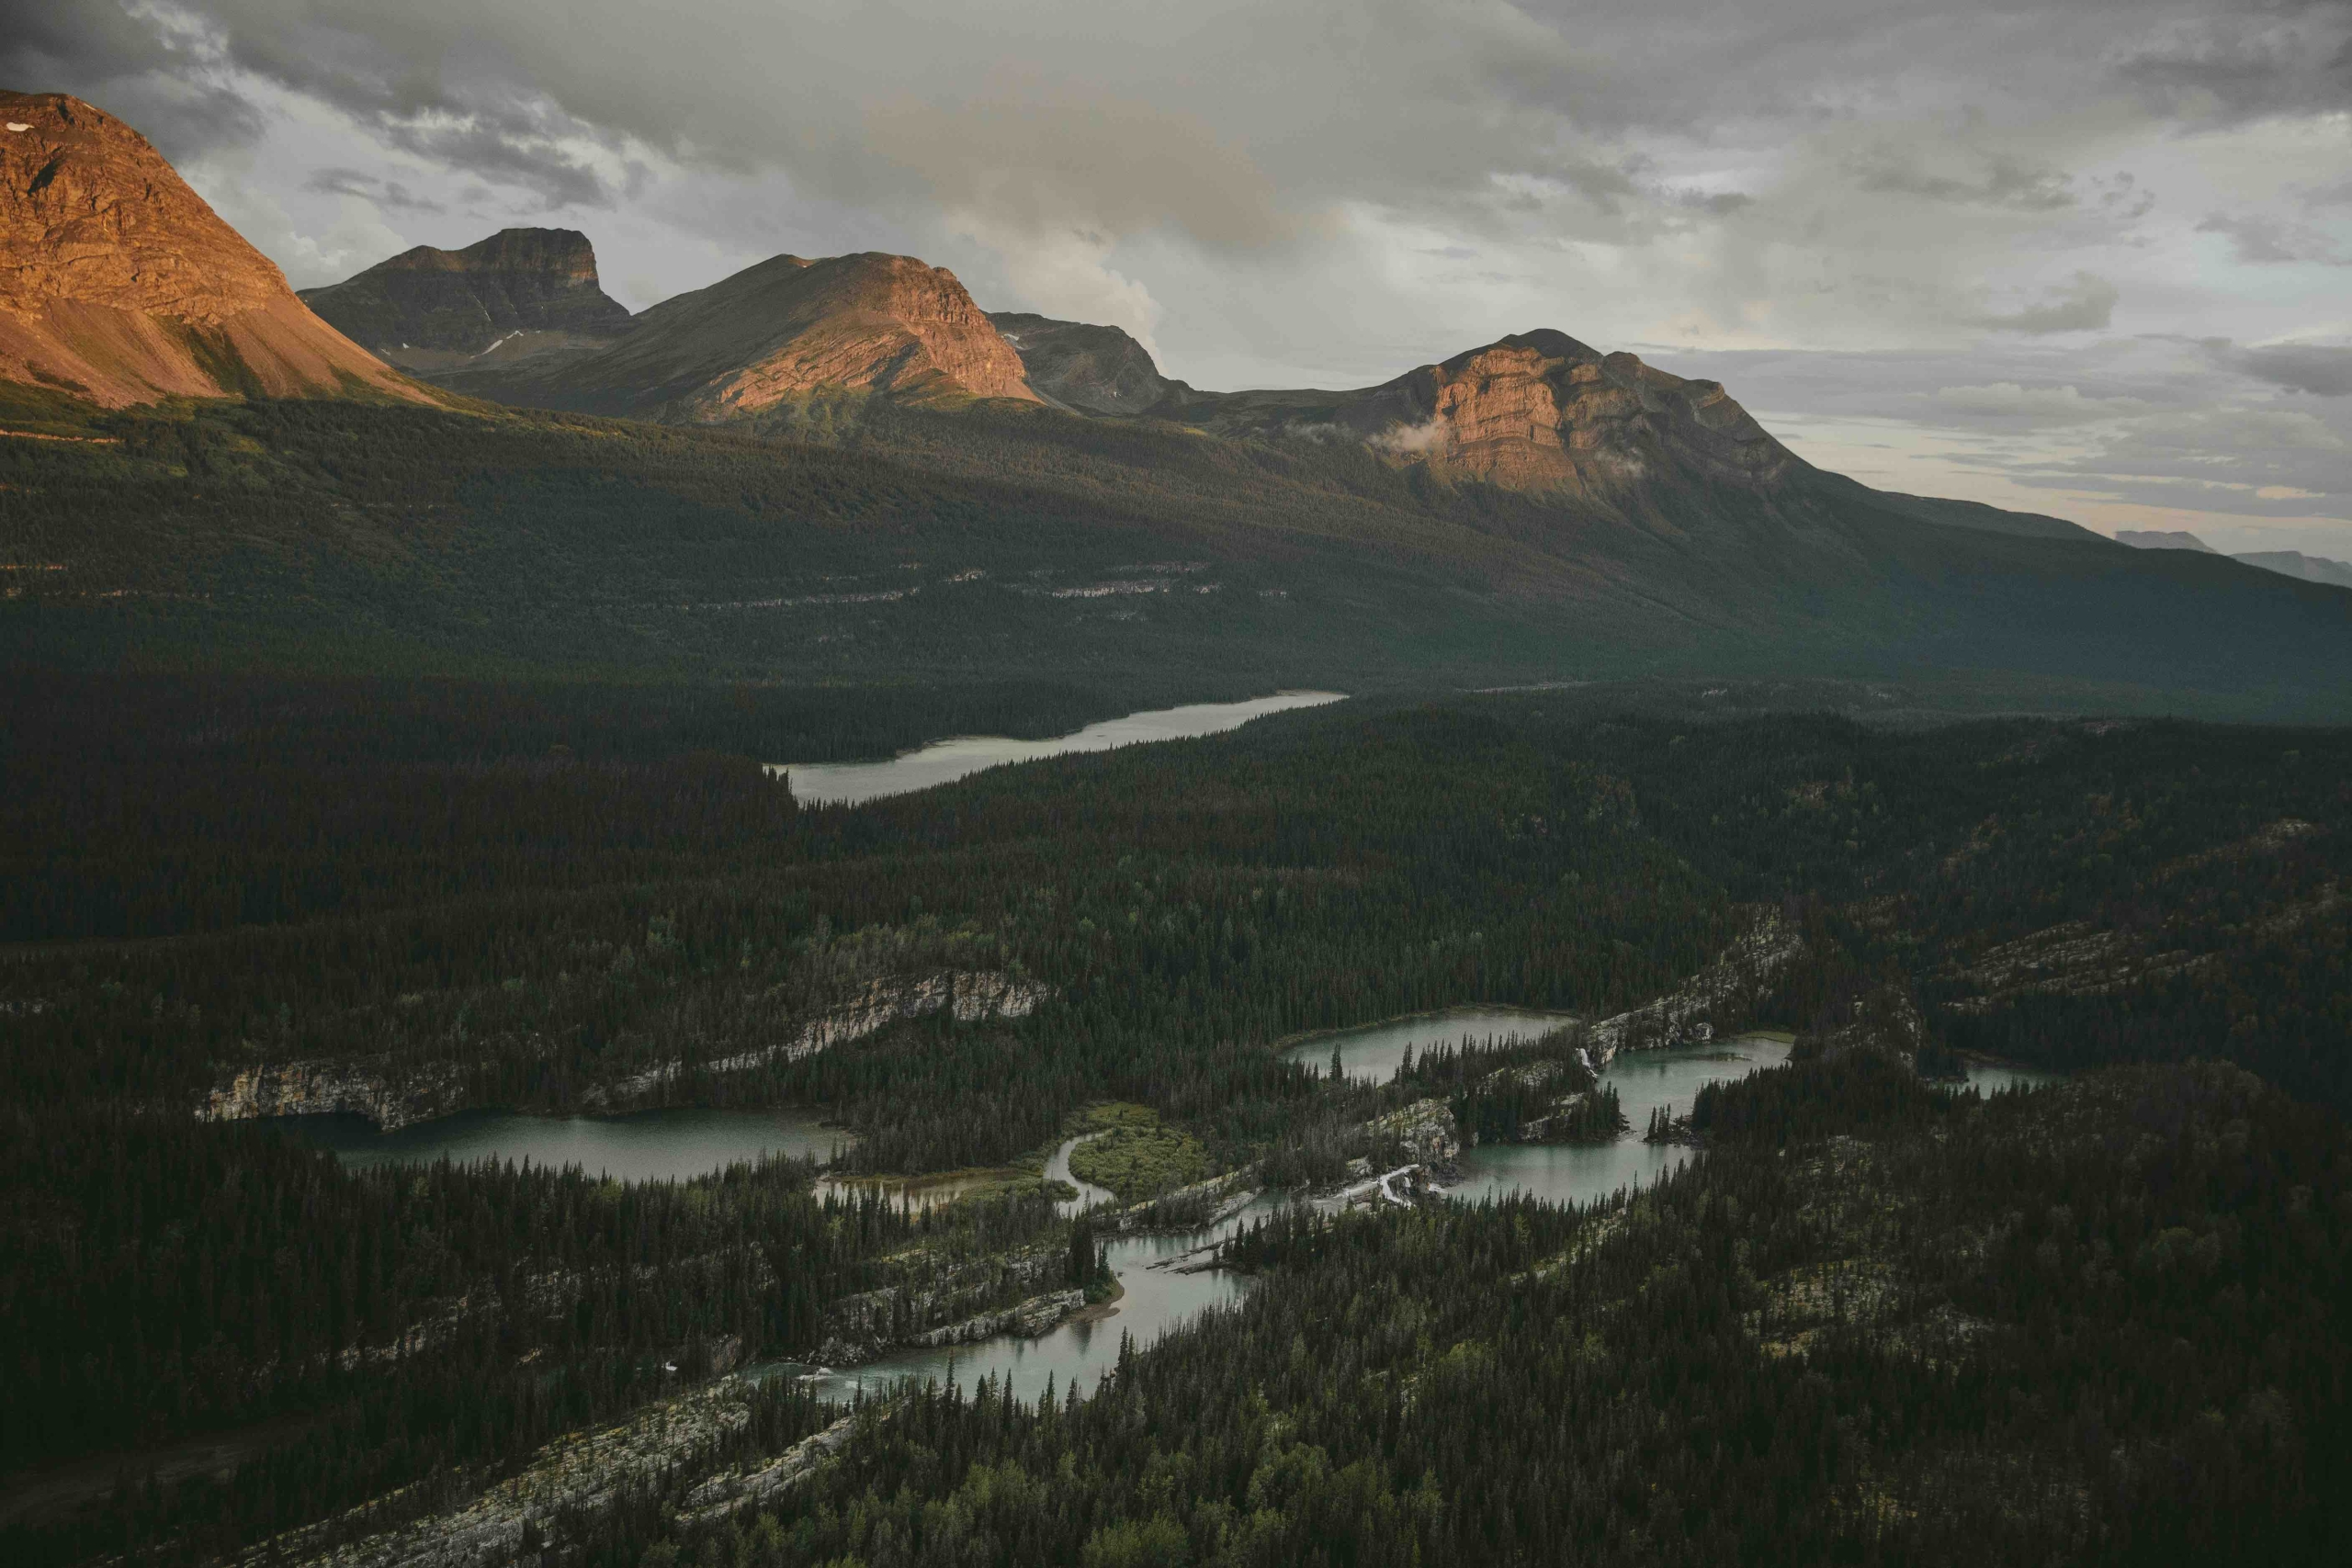 A mountain range at sunset in the Northern Rockies. A river system flows in the valley below.